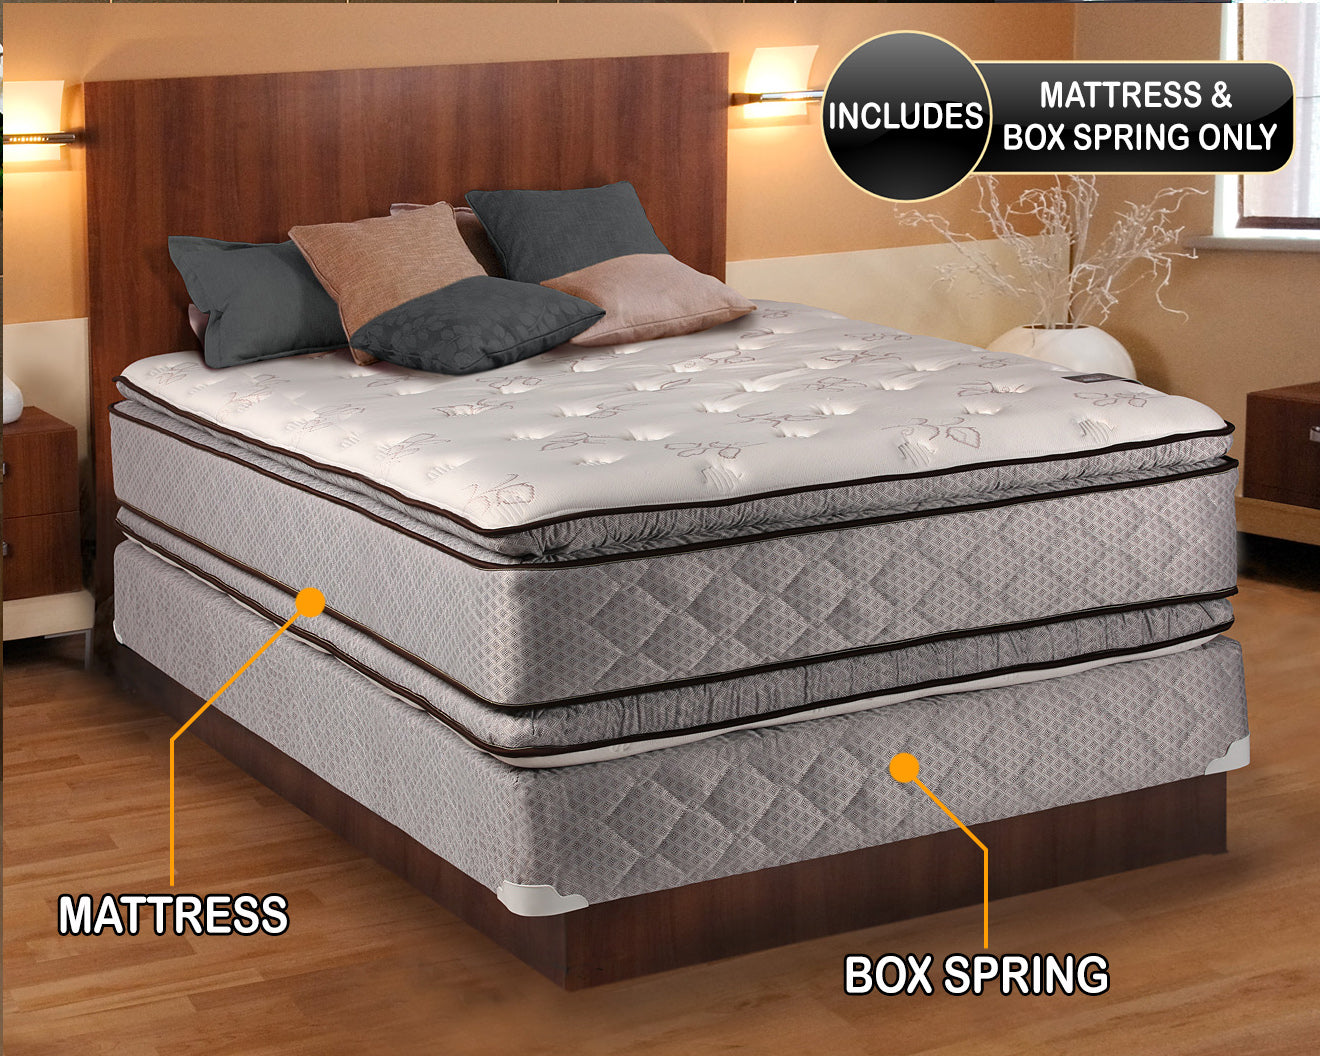 Hollywood Double Sided Pillowtop Full Size Mattress And Box Springs Set